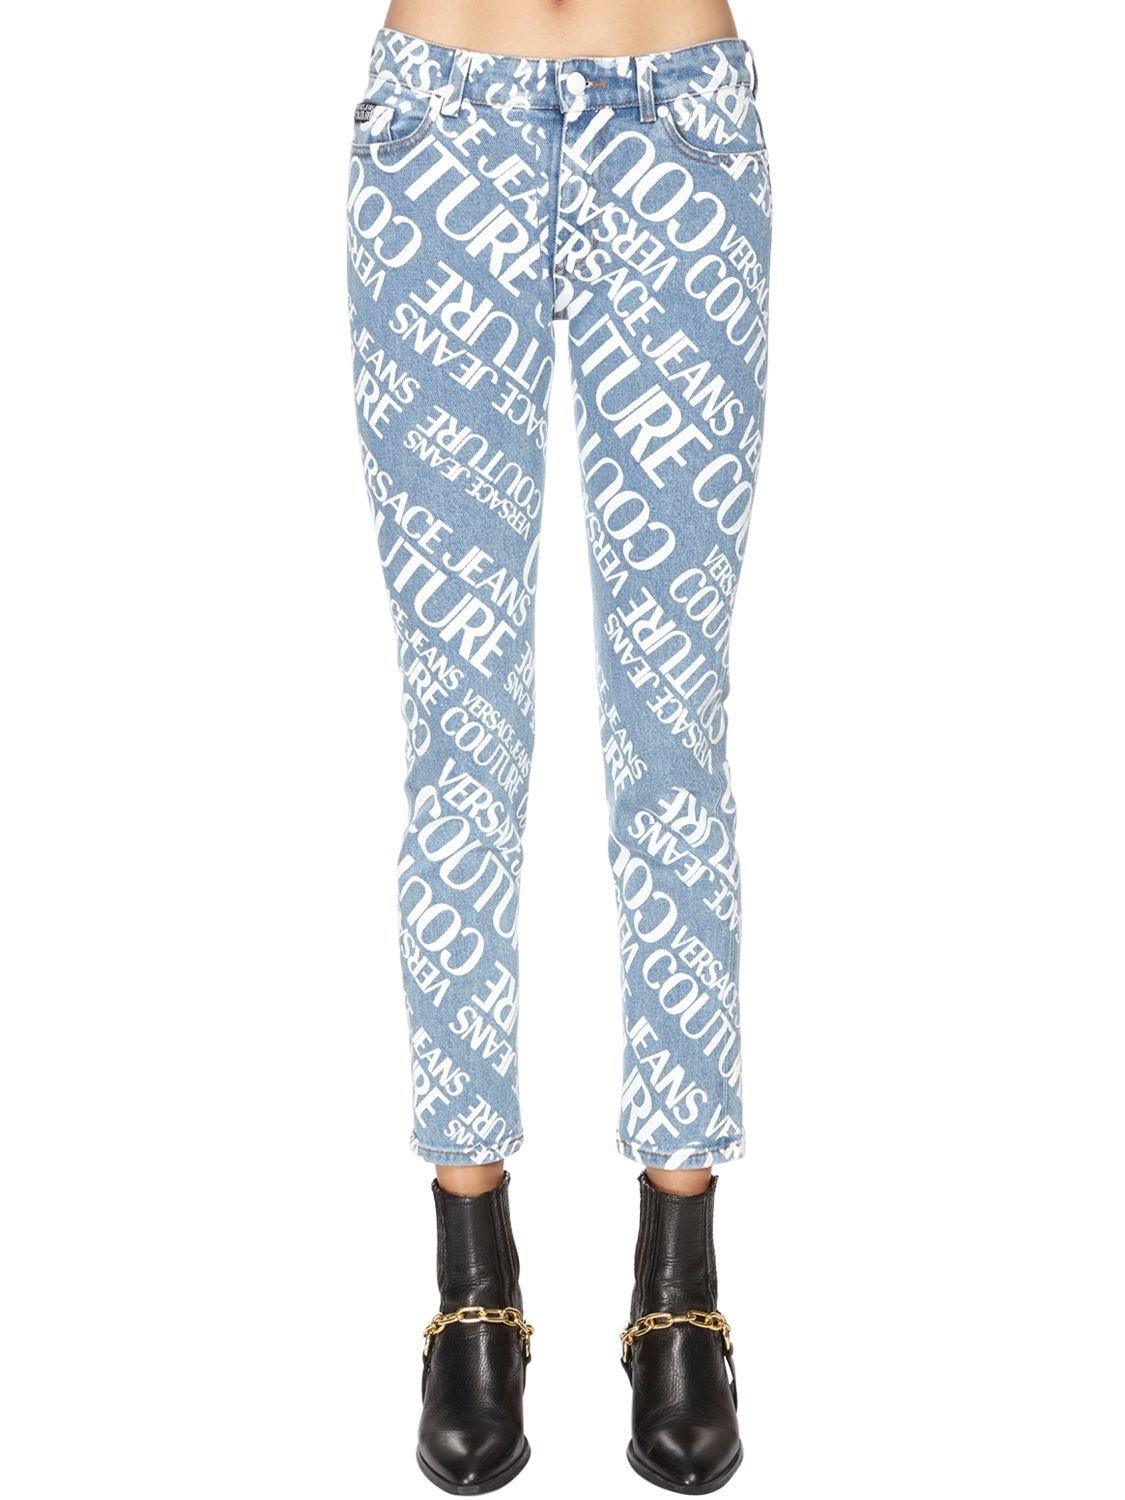 VERSACE JEANS COUTURE ALL OVER PRINTED COTTON DENIM JEANS,71I0TY001-OTA00